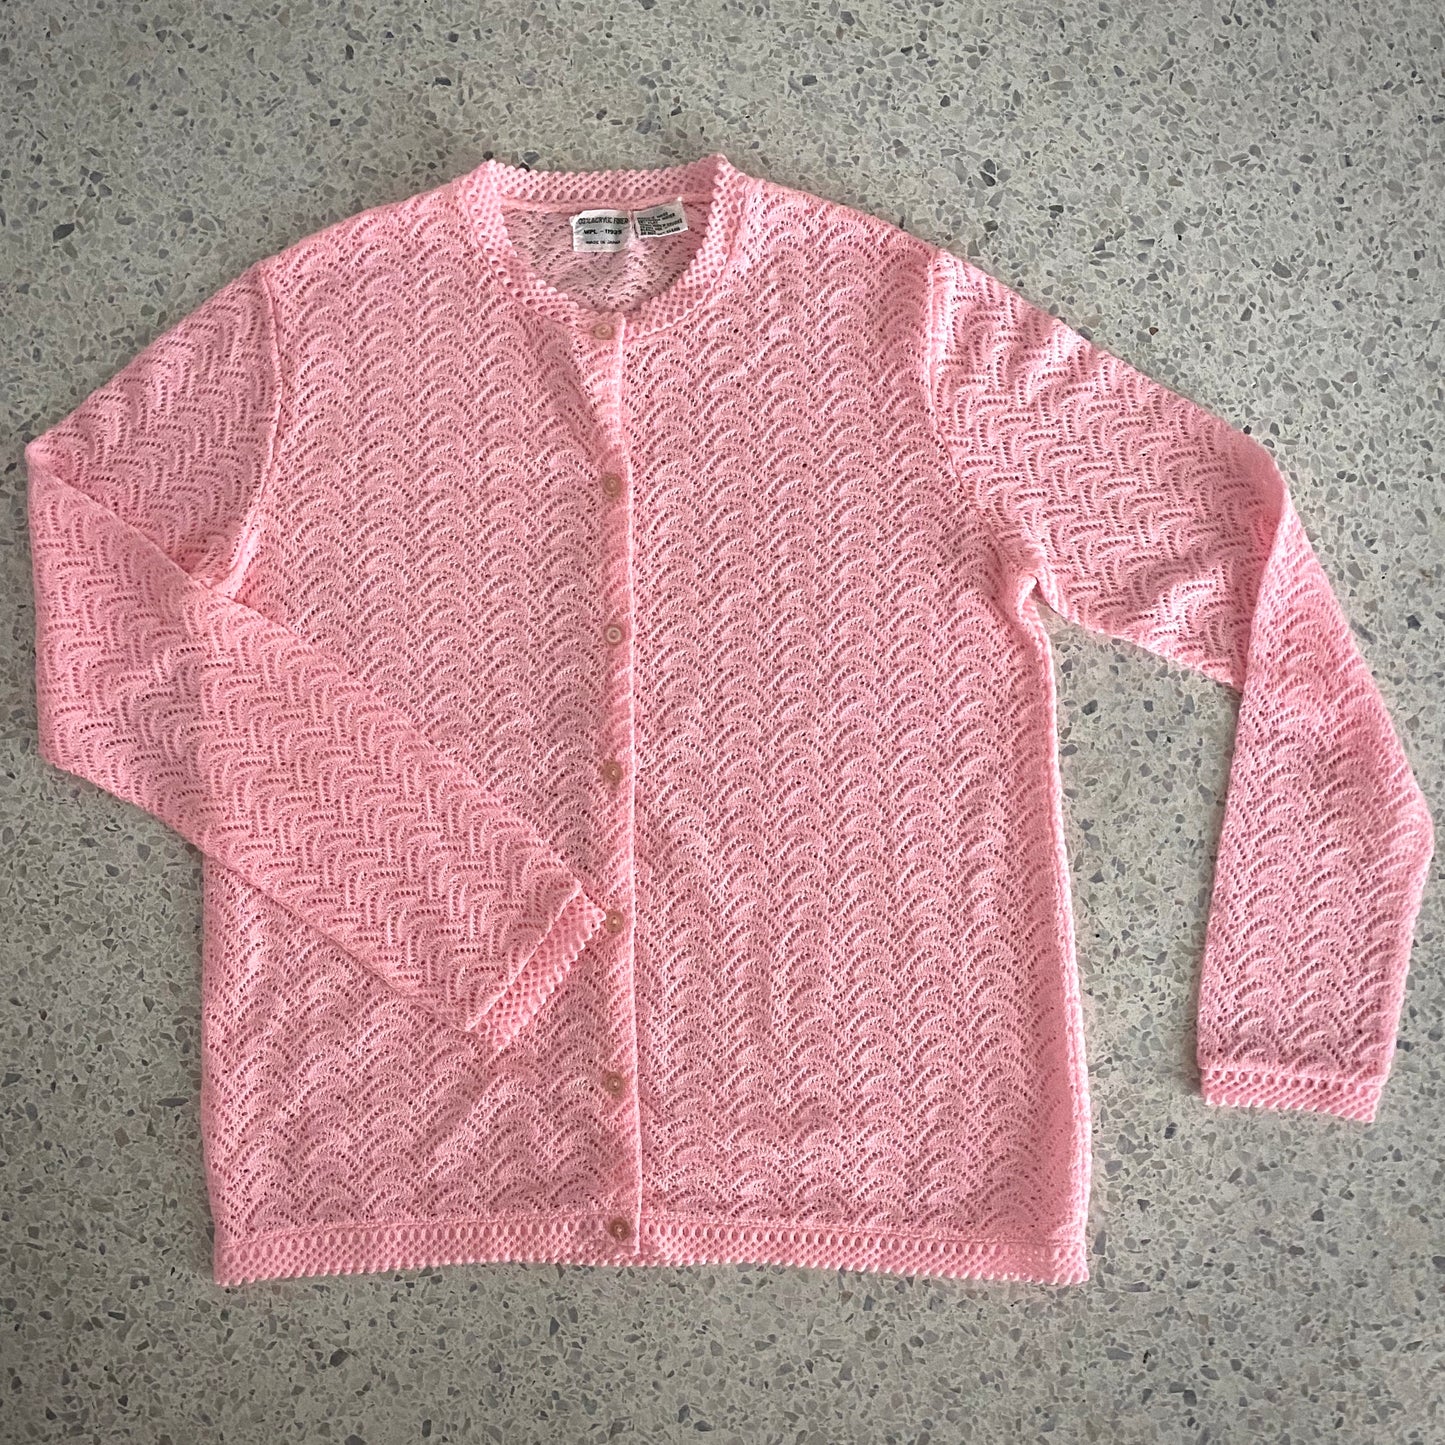 1960s Made in Japan Cardigan Sweater